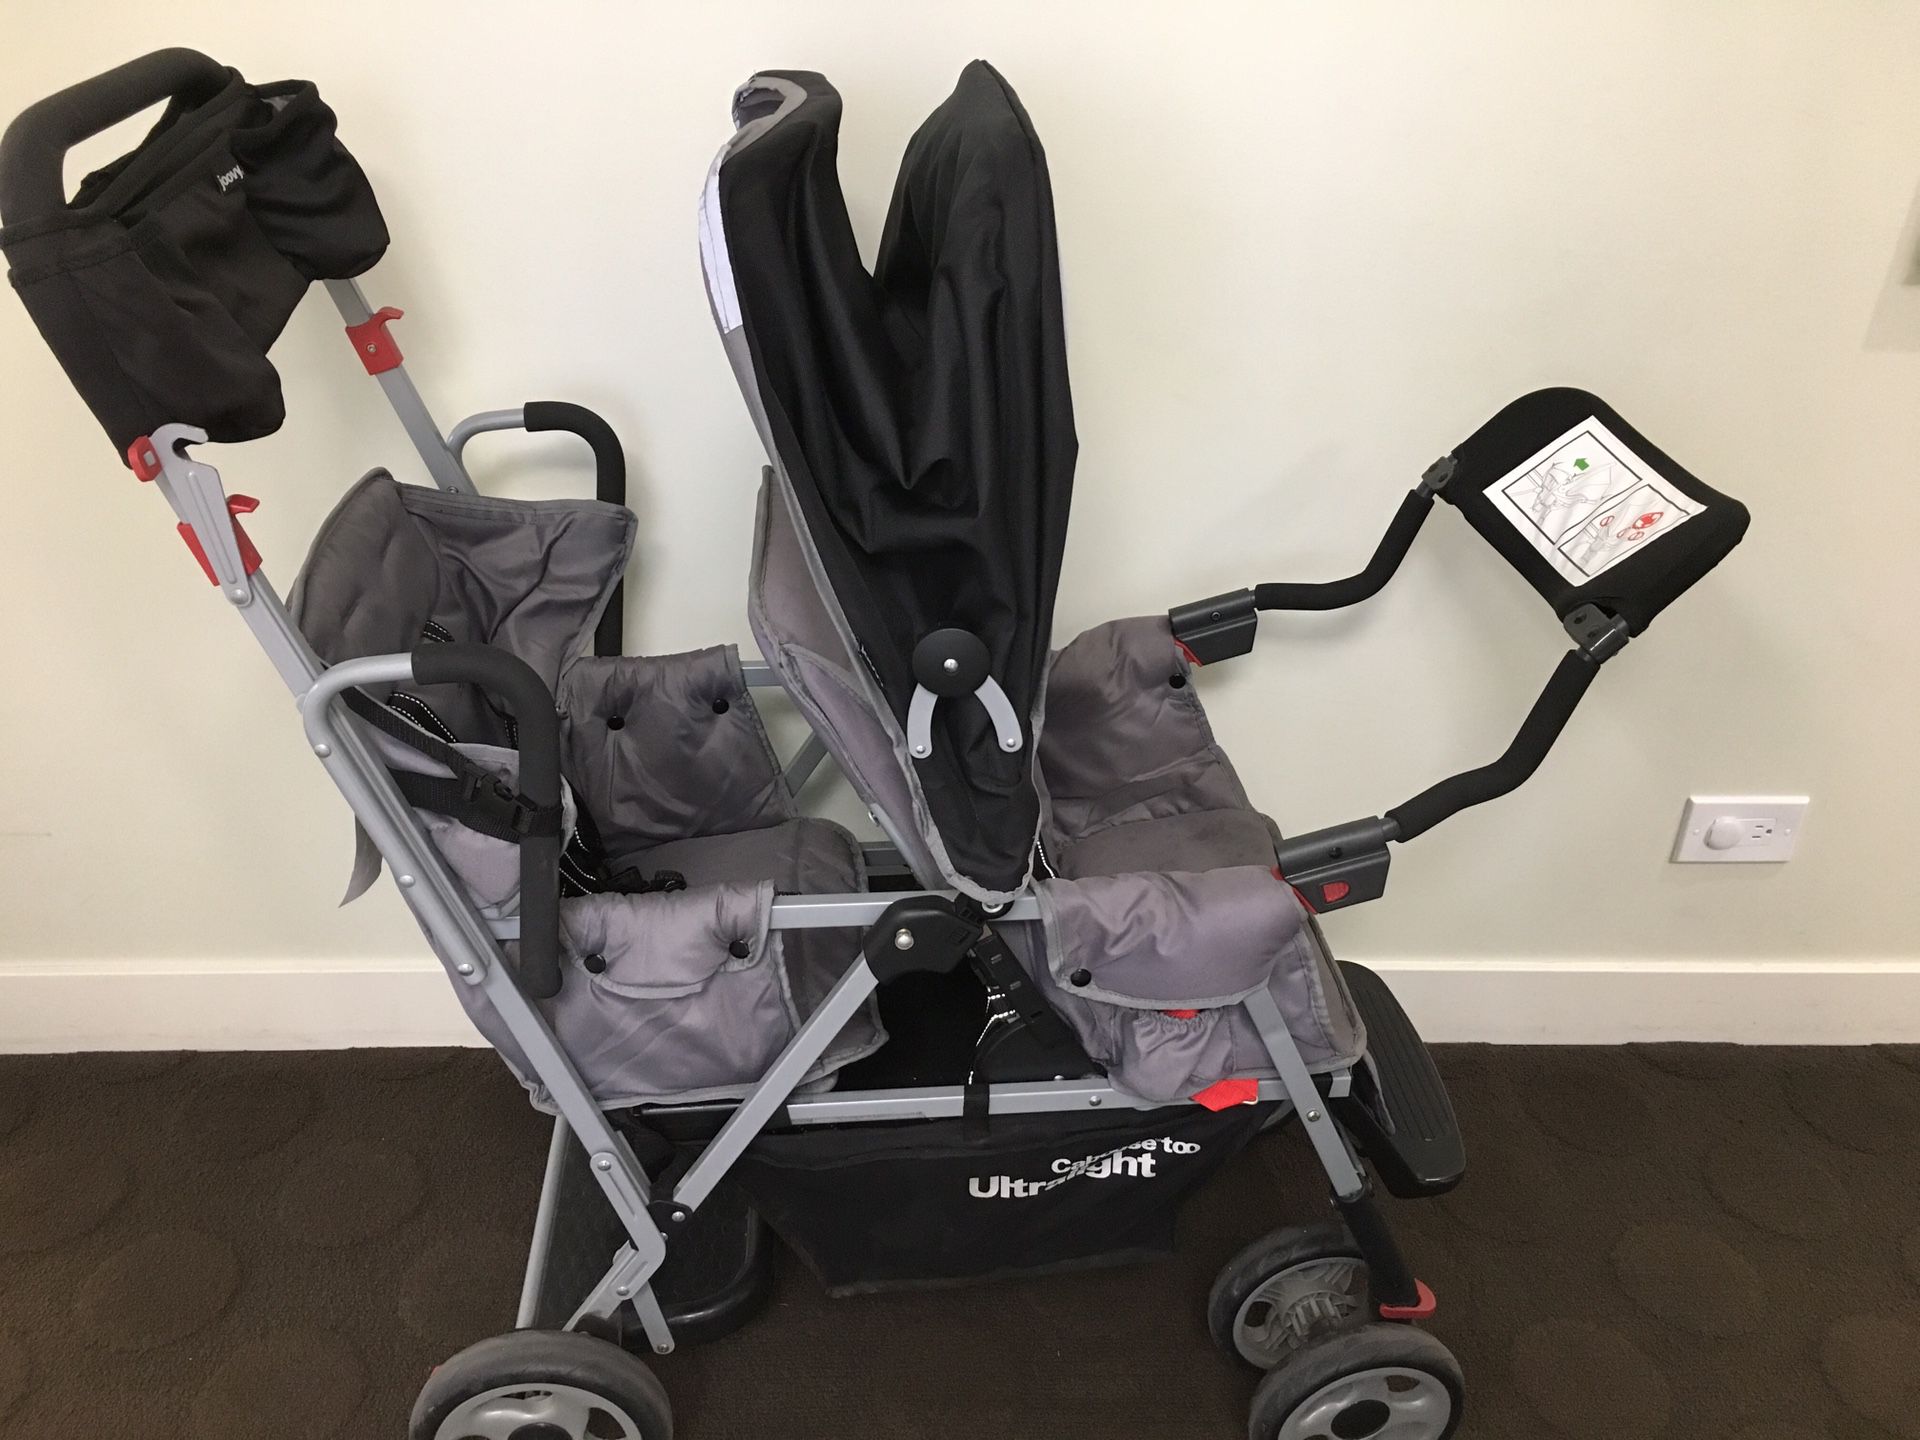 Caboose Too Ultralight-double stroller